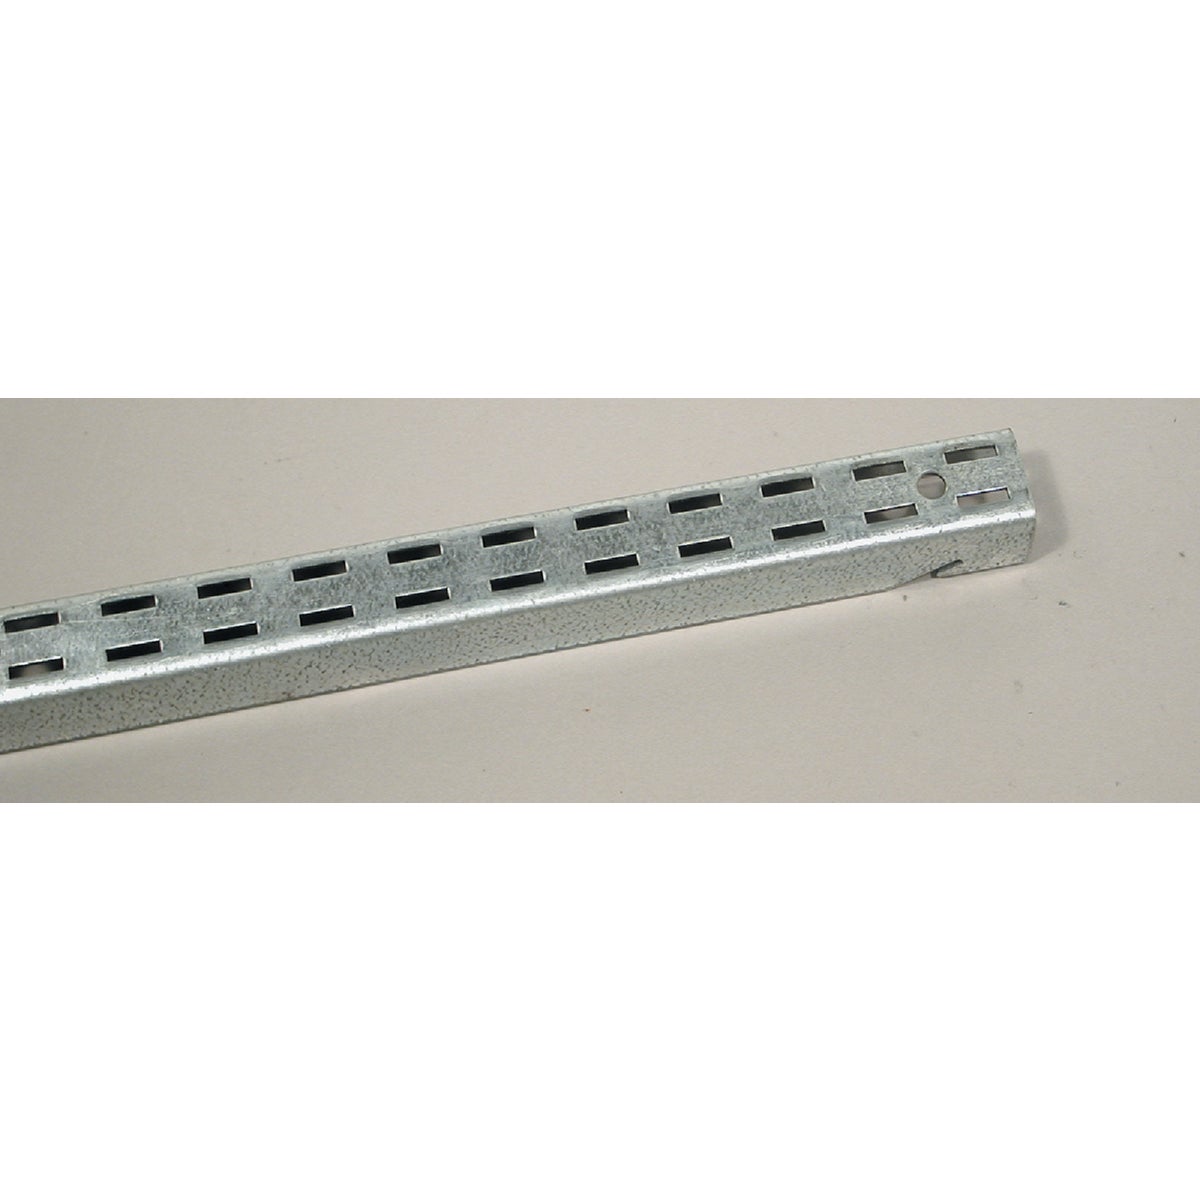 Item 244295, Heavy-duty double slotted standard can be mounted with the Fast-Mount hook